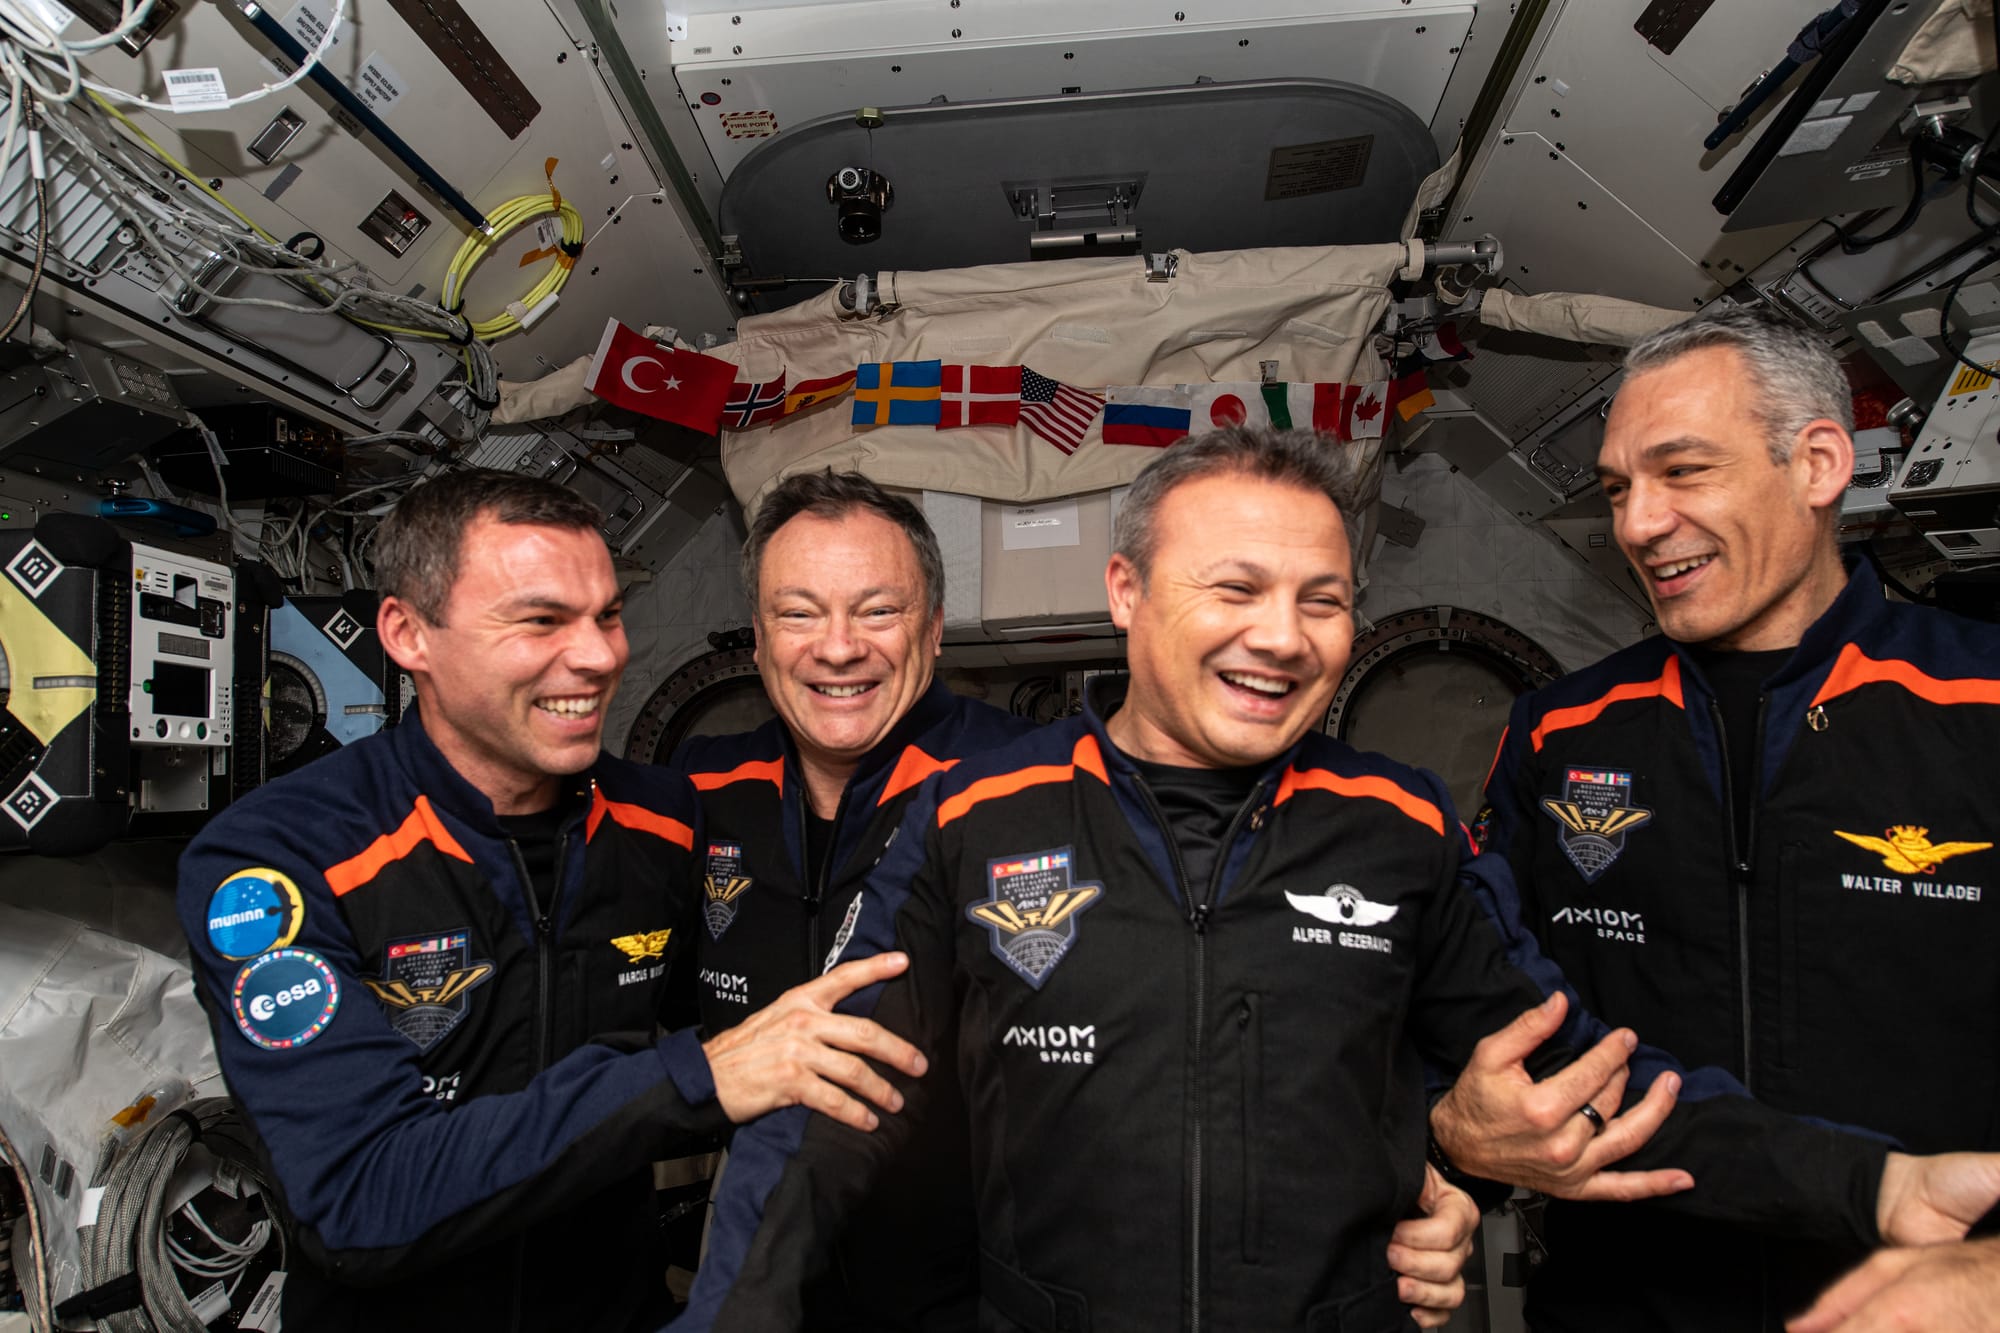 The crew of Axiom-3 inside the International Space Station (from left to right): Marcus Wandt, Michael López-Alegría, Alper Gezeravcı, and Walter Villadei. ©Axiom Space 